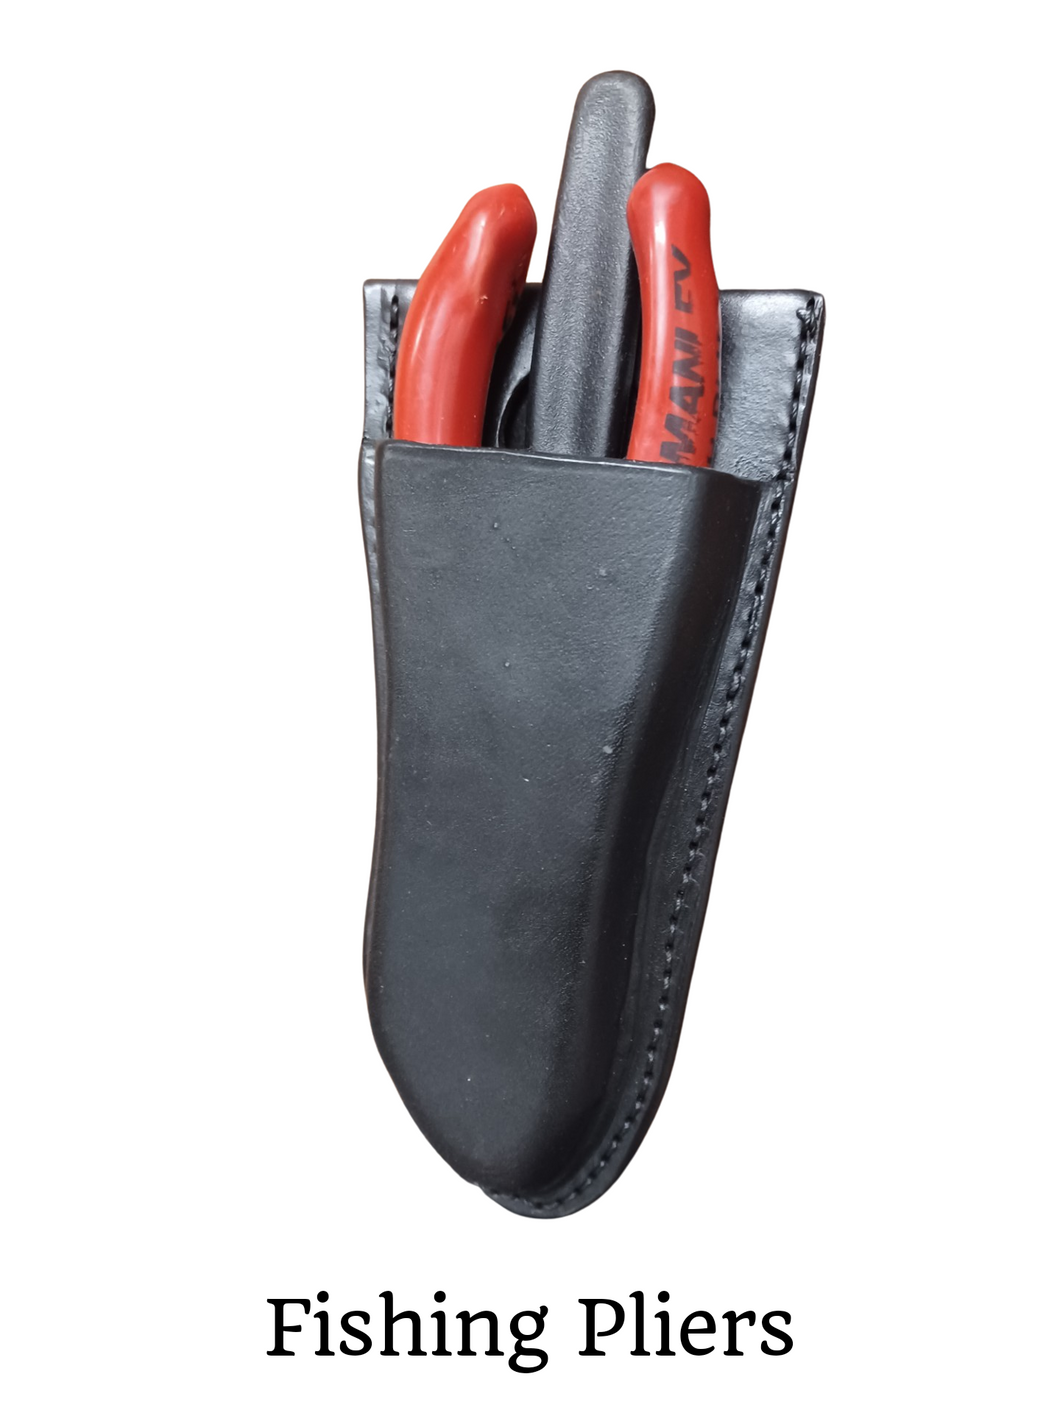 Fishing Pliers and Knife Sheath for 6 1/2